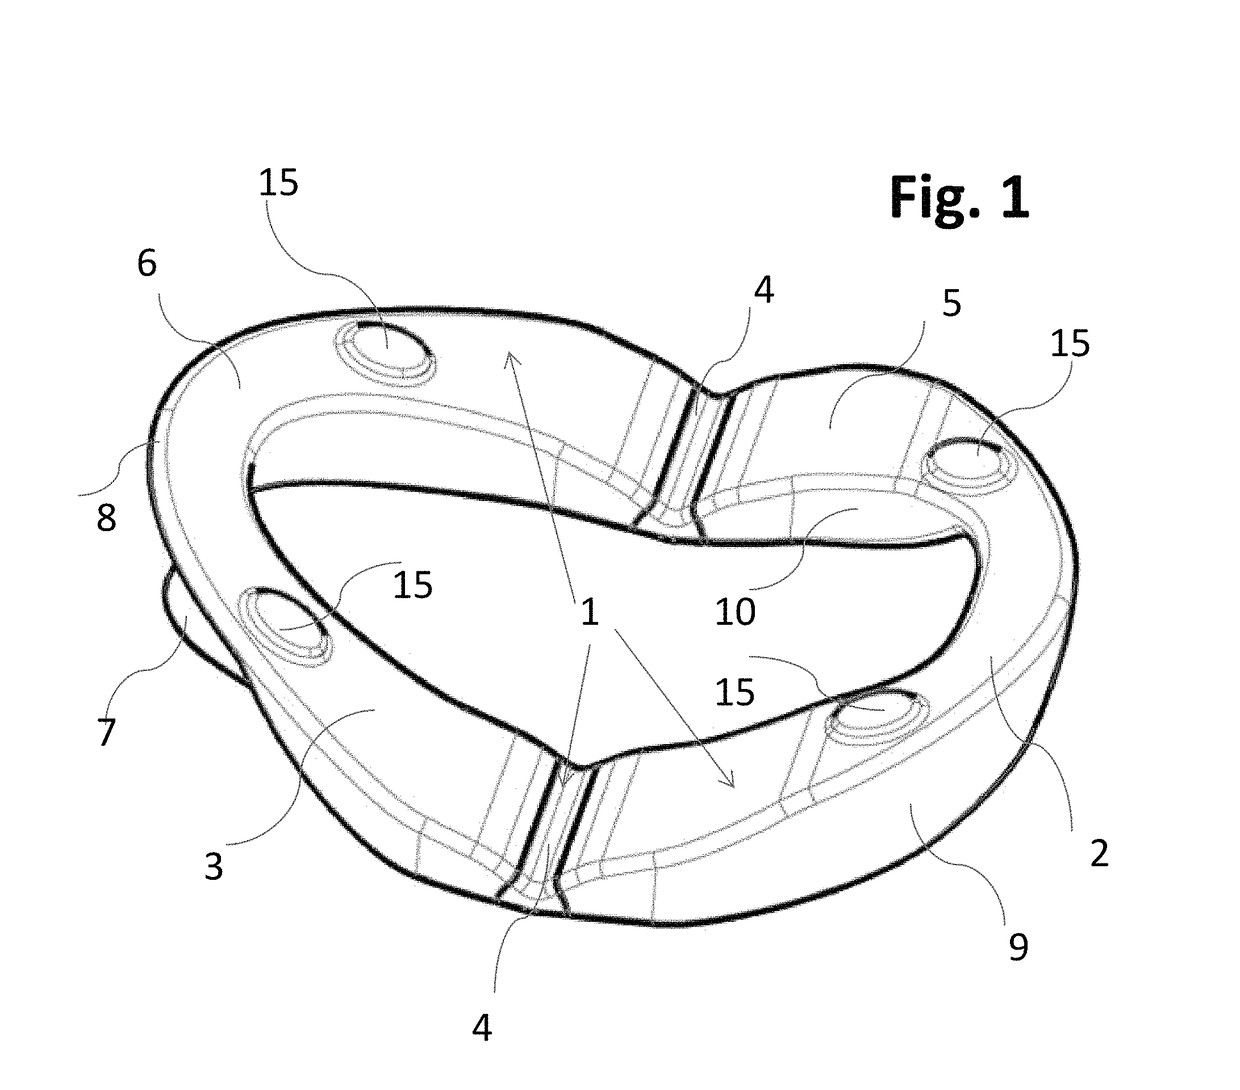 Incremental and/or successive adjustable mandibular advancement device for preventing and treatment of snoring and obstructive sleep apnea